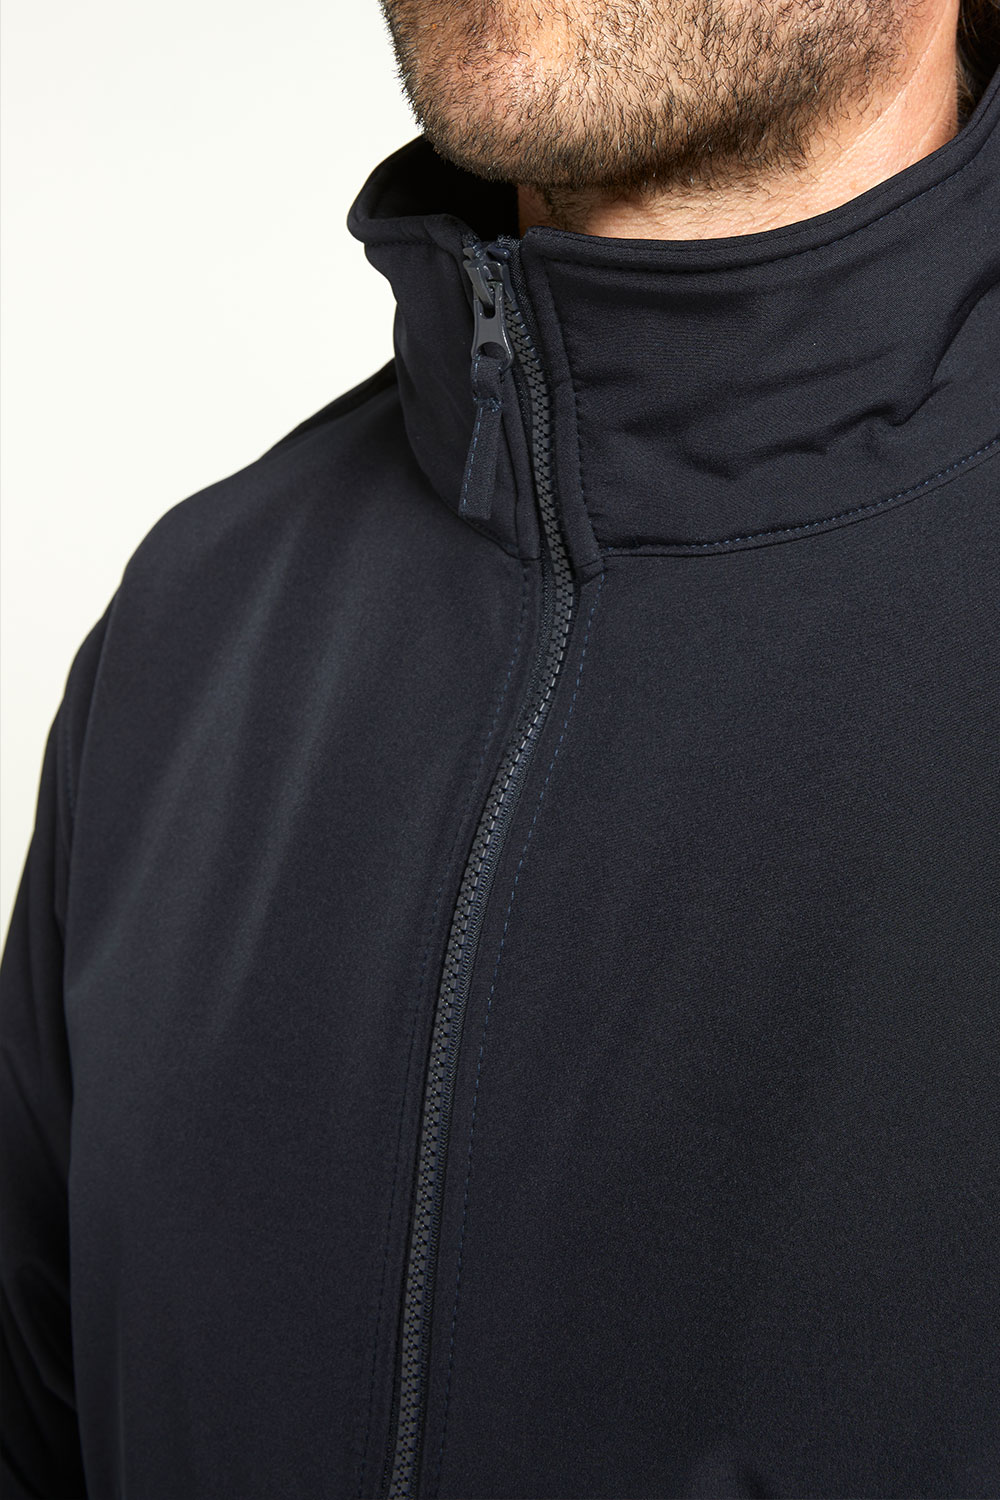 Navy Soft Shell Jacket | Sugdens | Corporate Clothing, Uniforms and ...